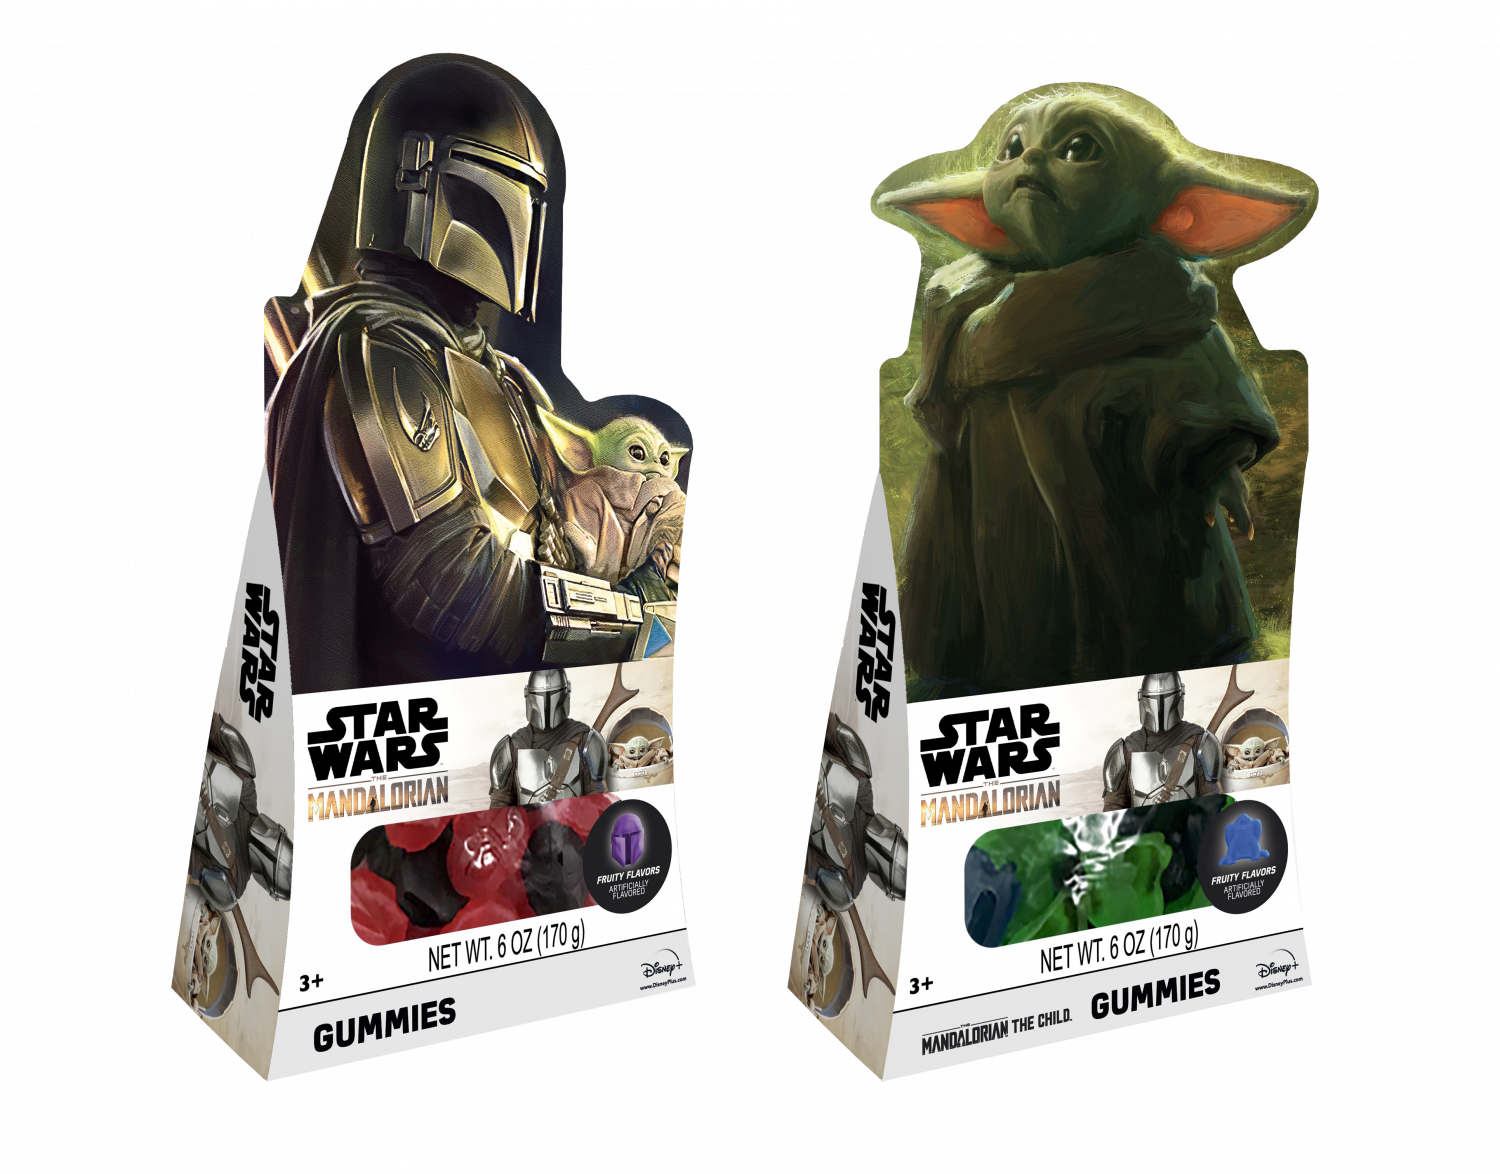 Star Wars Mandalorian THE CHILD pack of fruity flavor gummies FAST SHIPPING!!! 